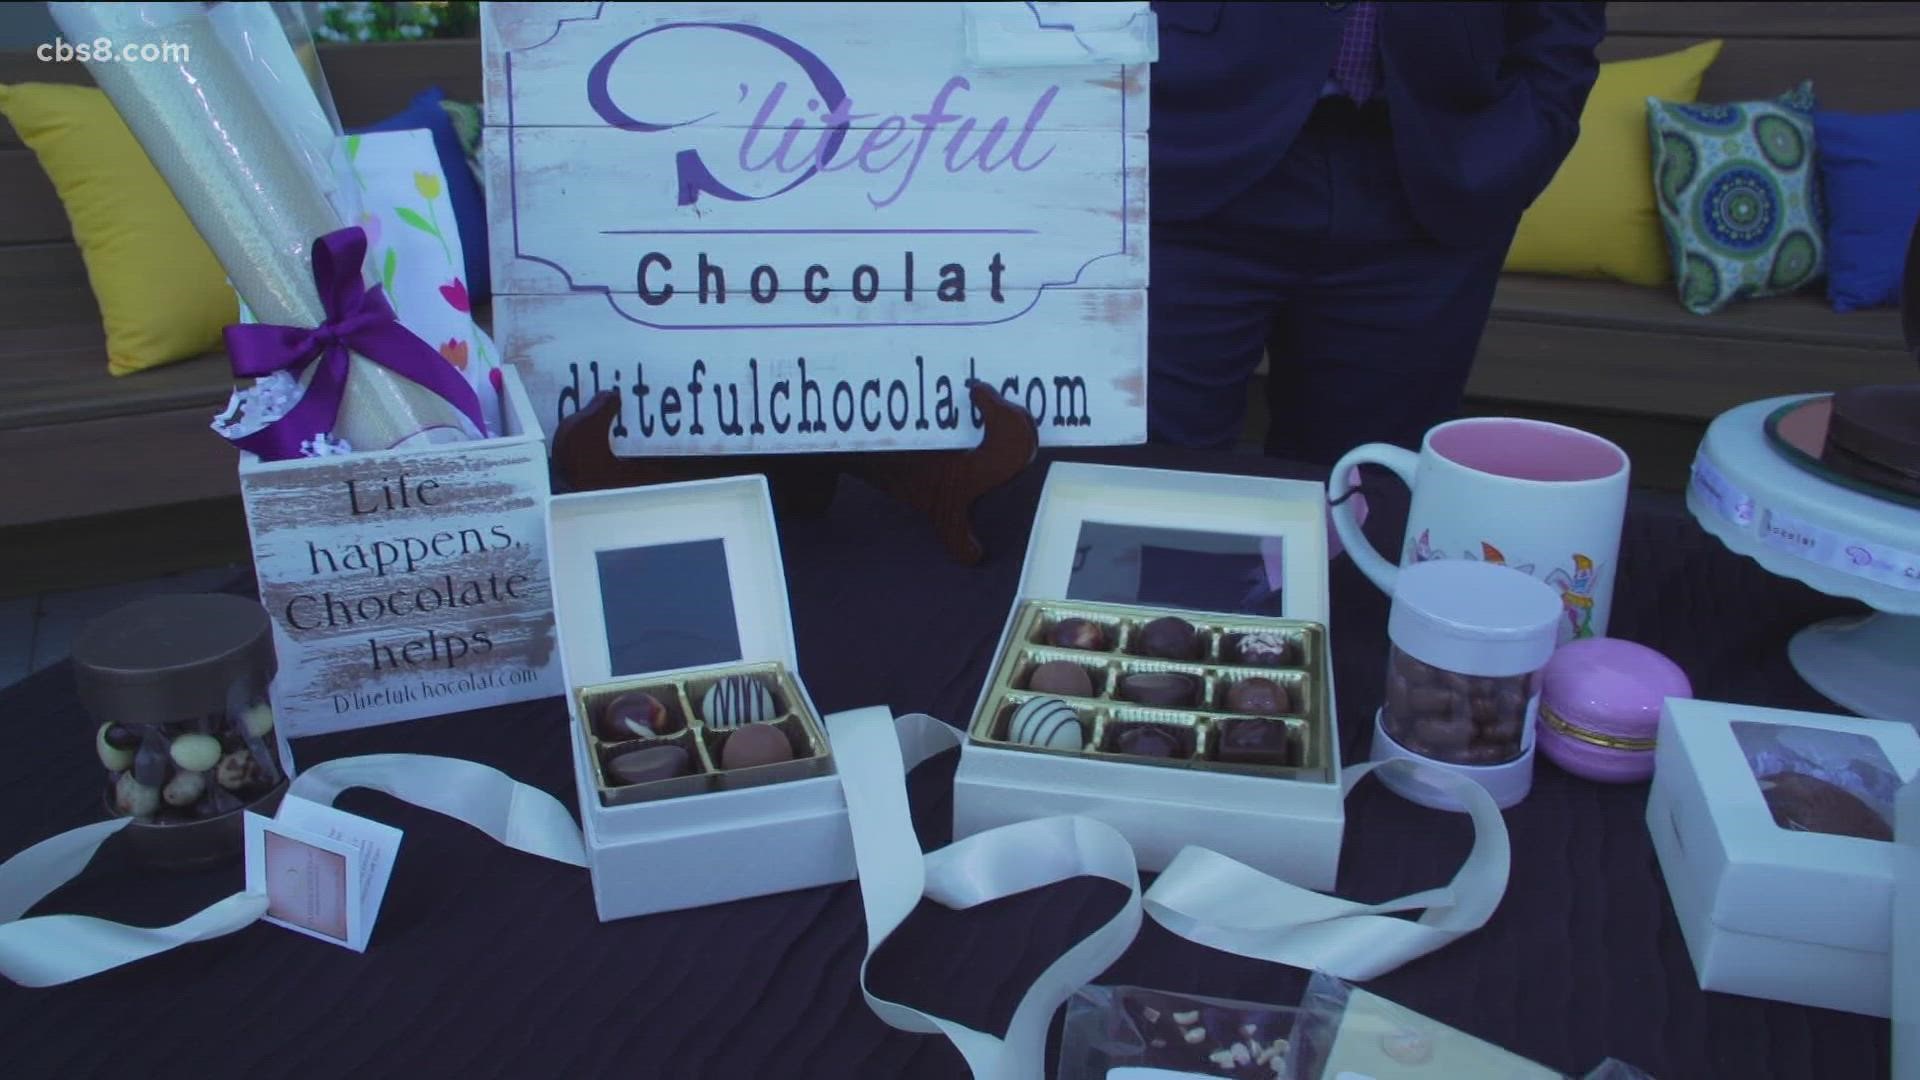 Chef Dayleen Coleman from D’Liteful Chocolat shows us all their chocolate treats.